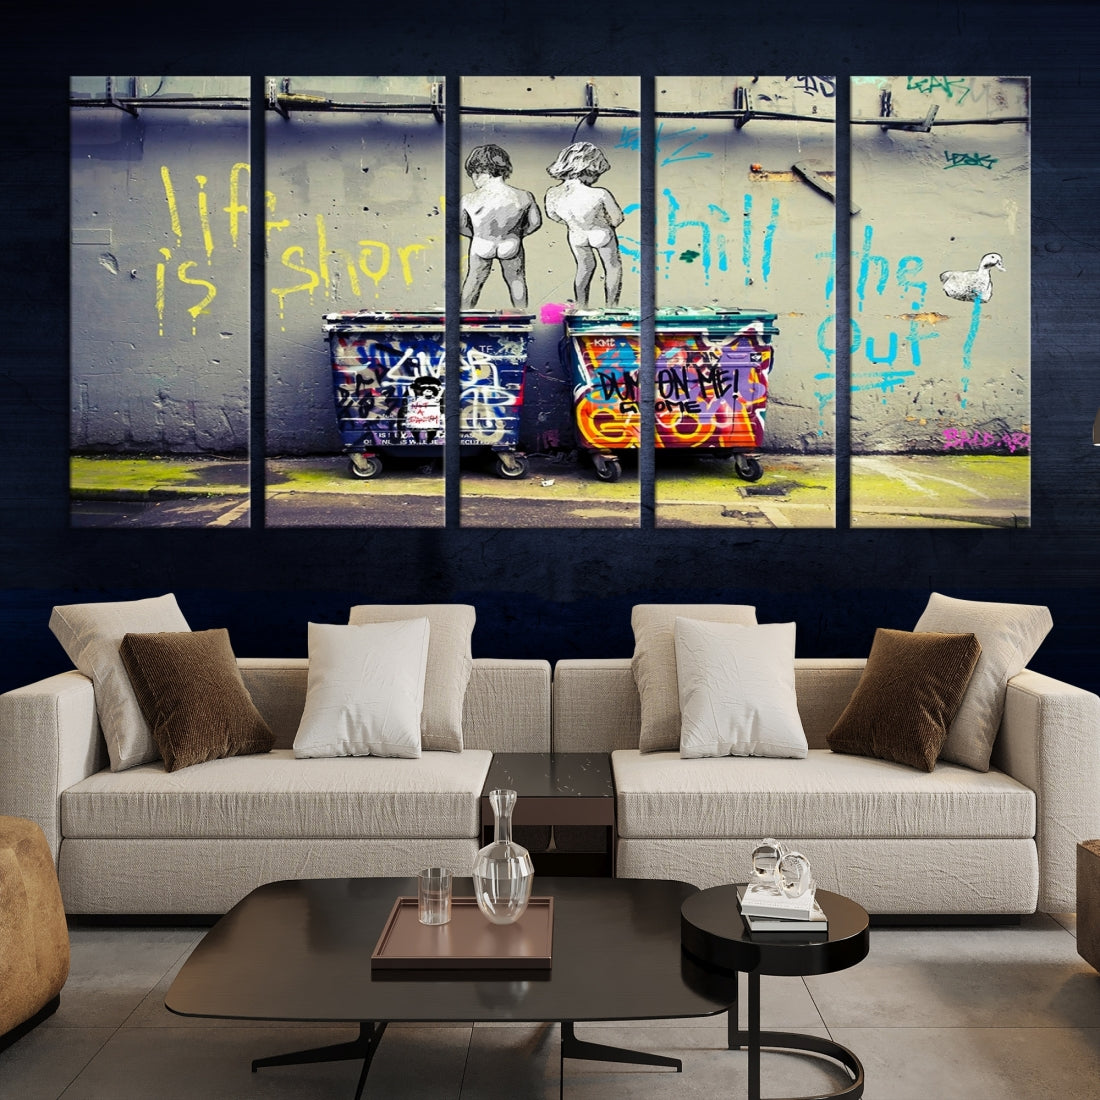 Graffiti Banksy Life Is Short Modern Abstract Large Canvas Wall Art Print for Living Room, Colorful Abstract Artwork